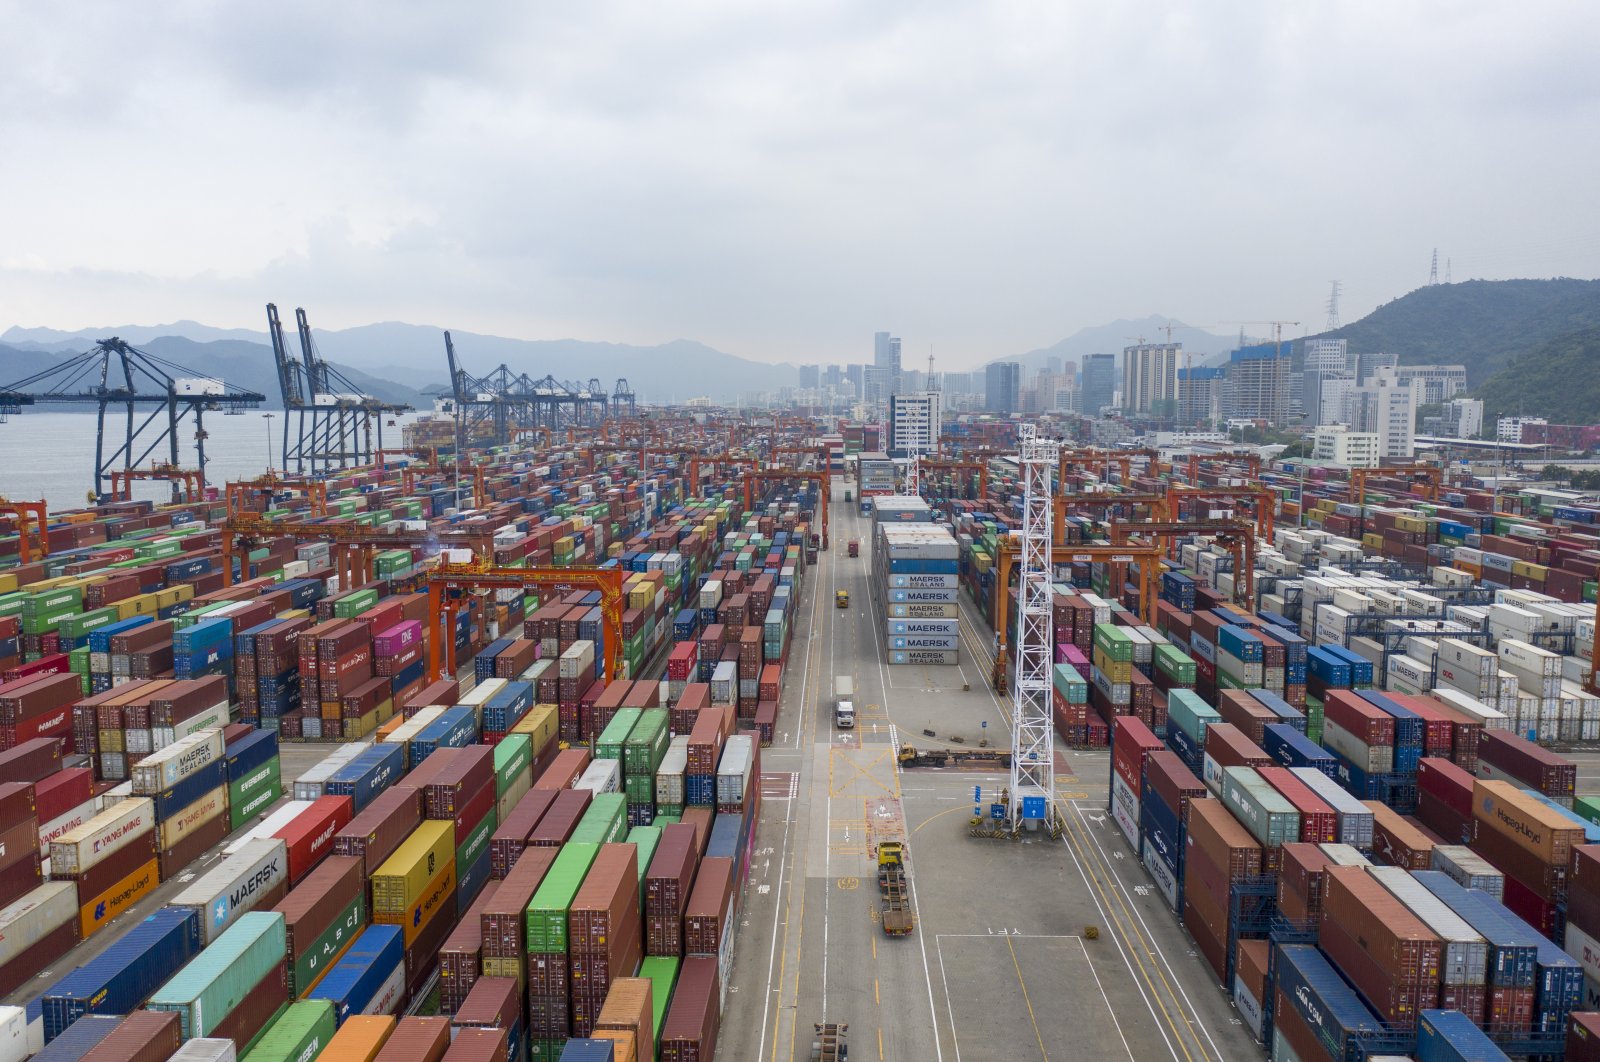 An aerial view of containers sitting stacked at the Yantian International Container Terminals, Shenzhen, Guangdong, China, Aug. 22, 2020. (Photo by Getty Images)